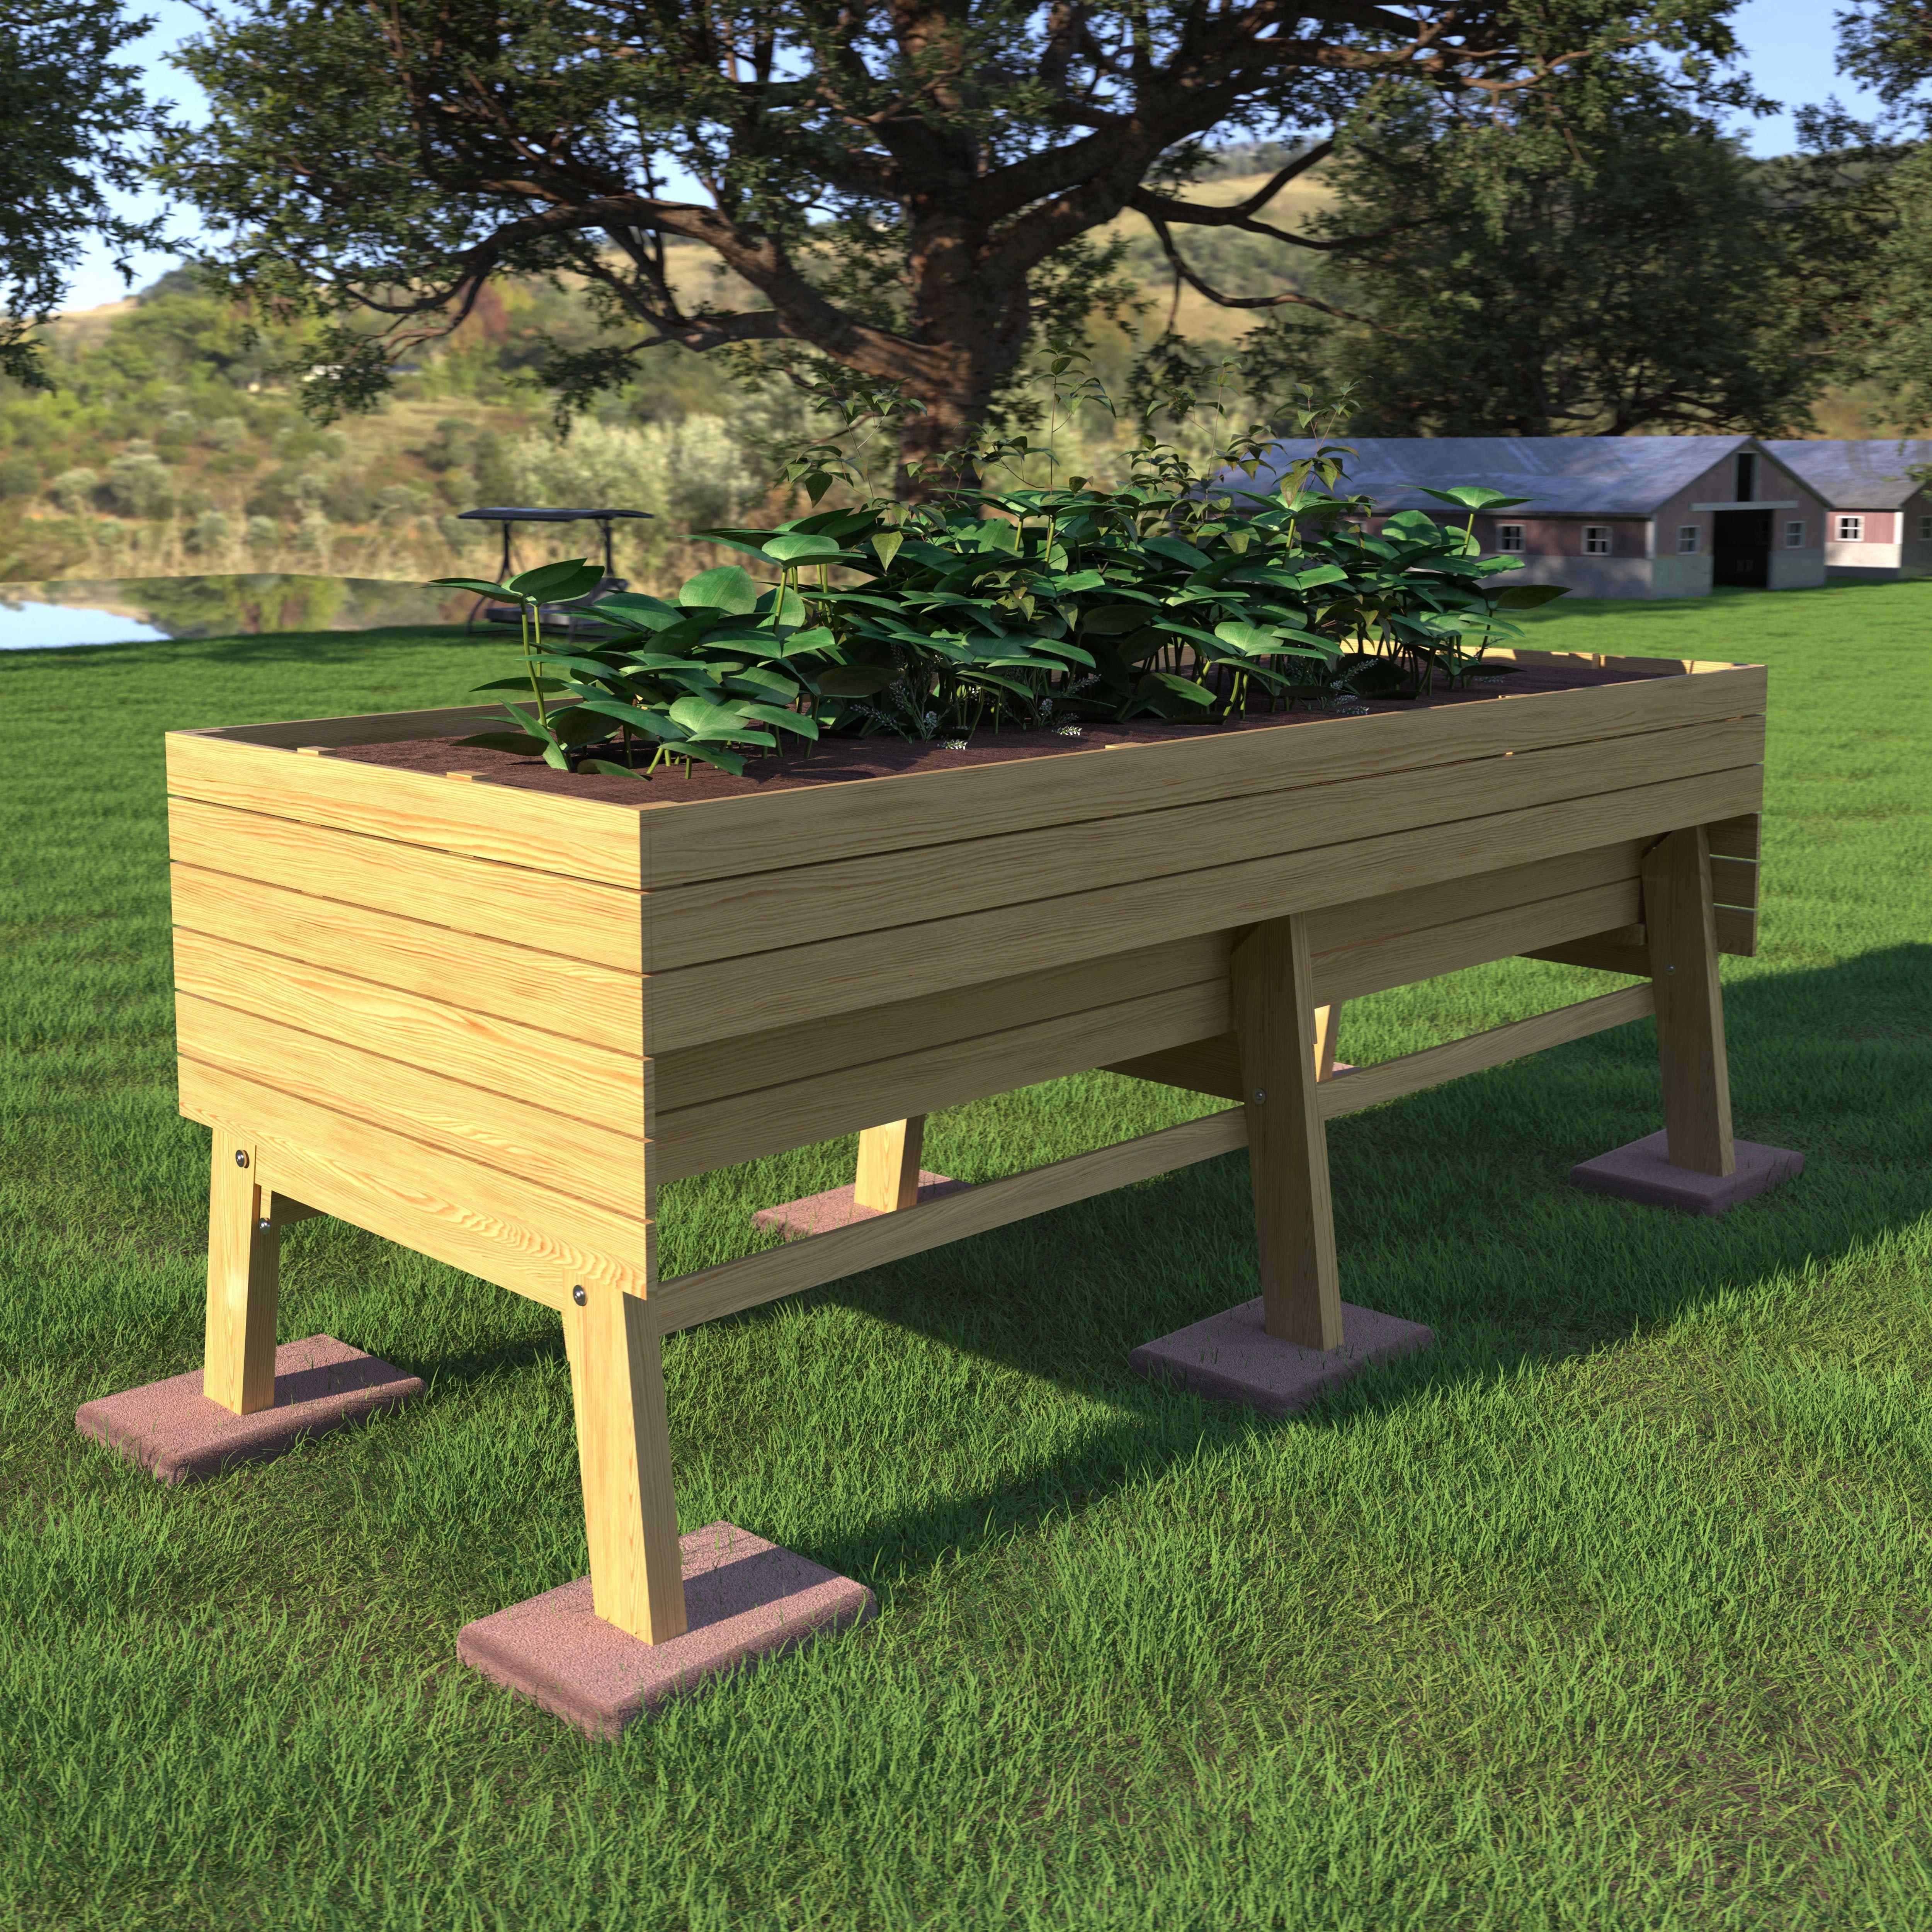 

Raised Beds For Gardening, Backyard, Patio, Balcony, Raised Garden Bed, Raised Garden Bed Outdoor, 6x3x2ft Cedar Garden Bed With A-shape Legs, Detachable Liner